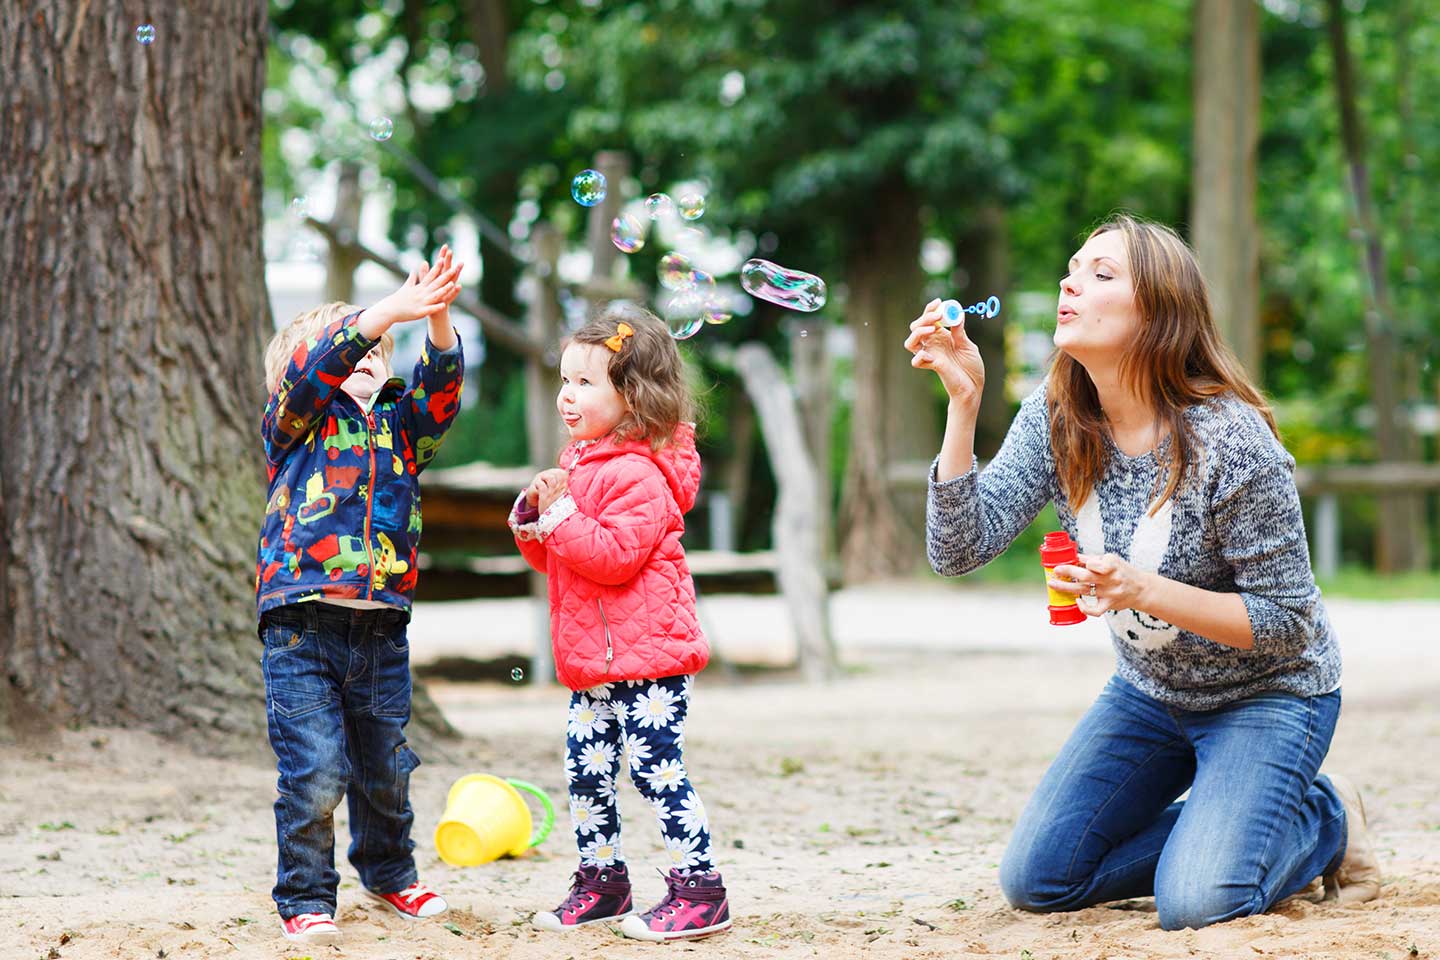 Woman blowing bubbles with children.